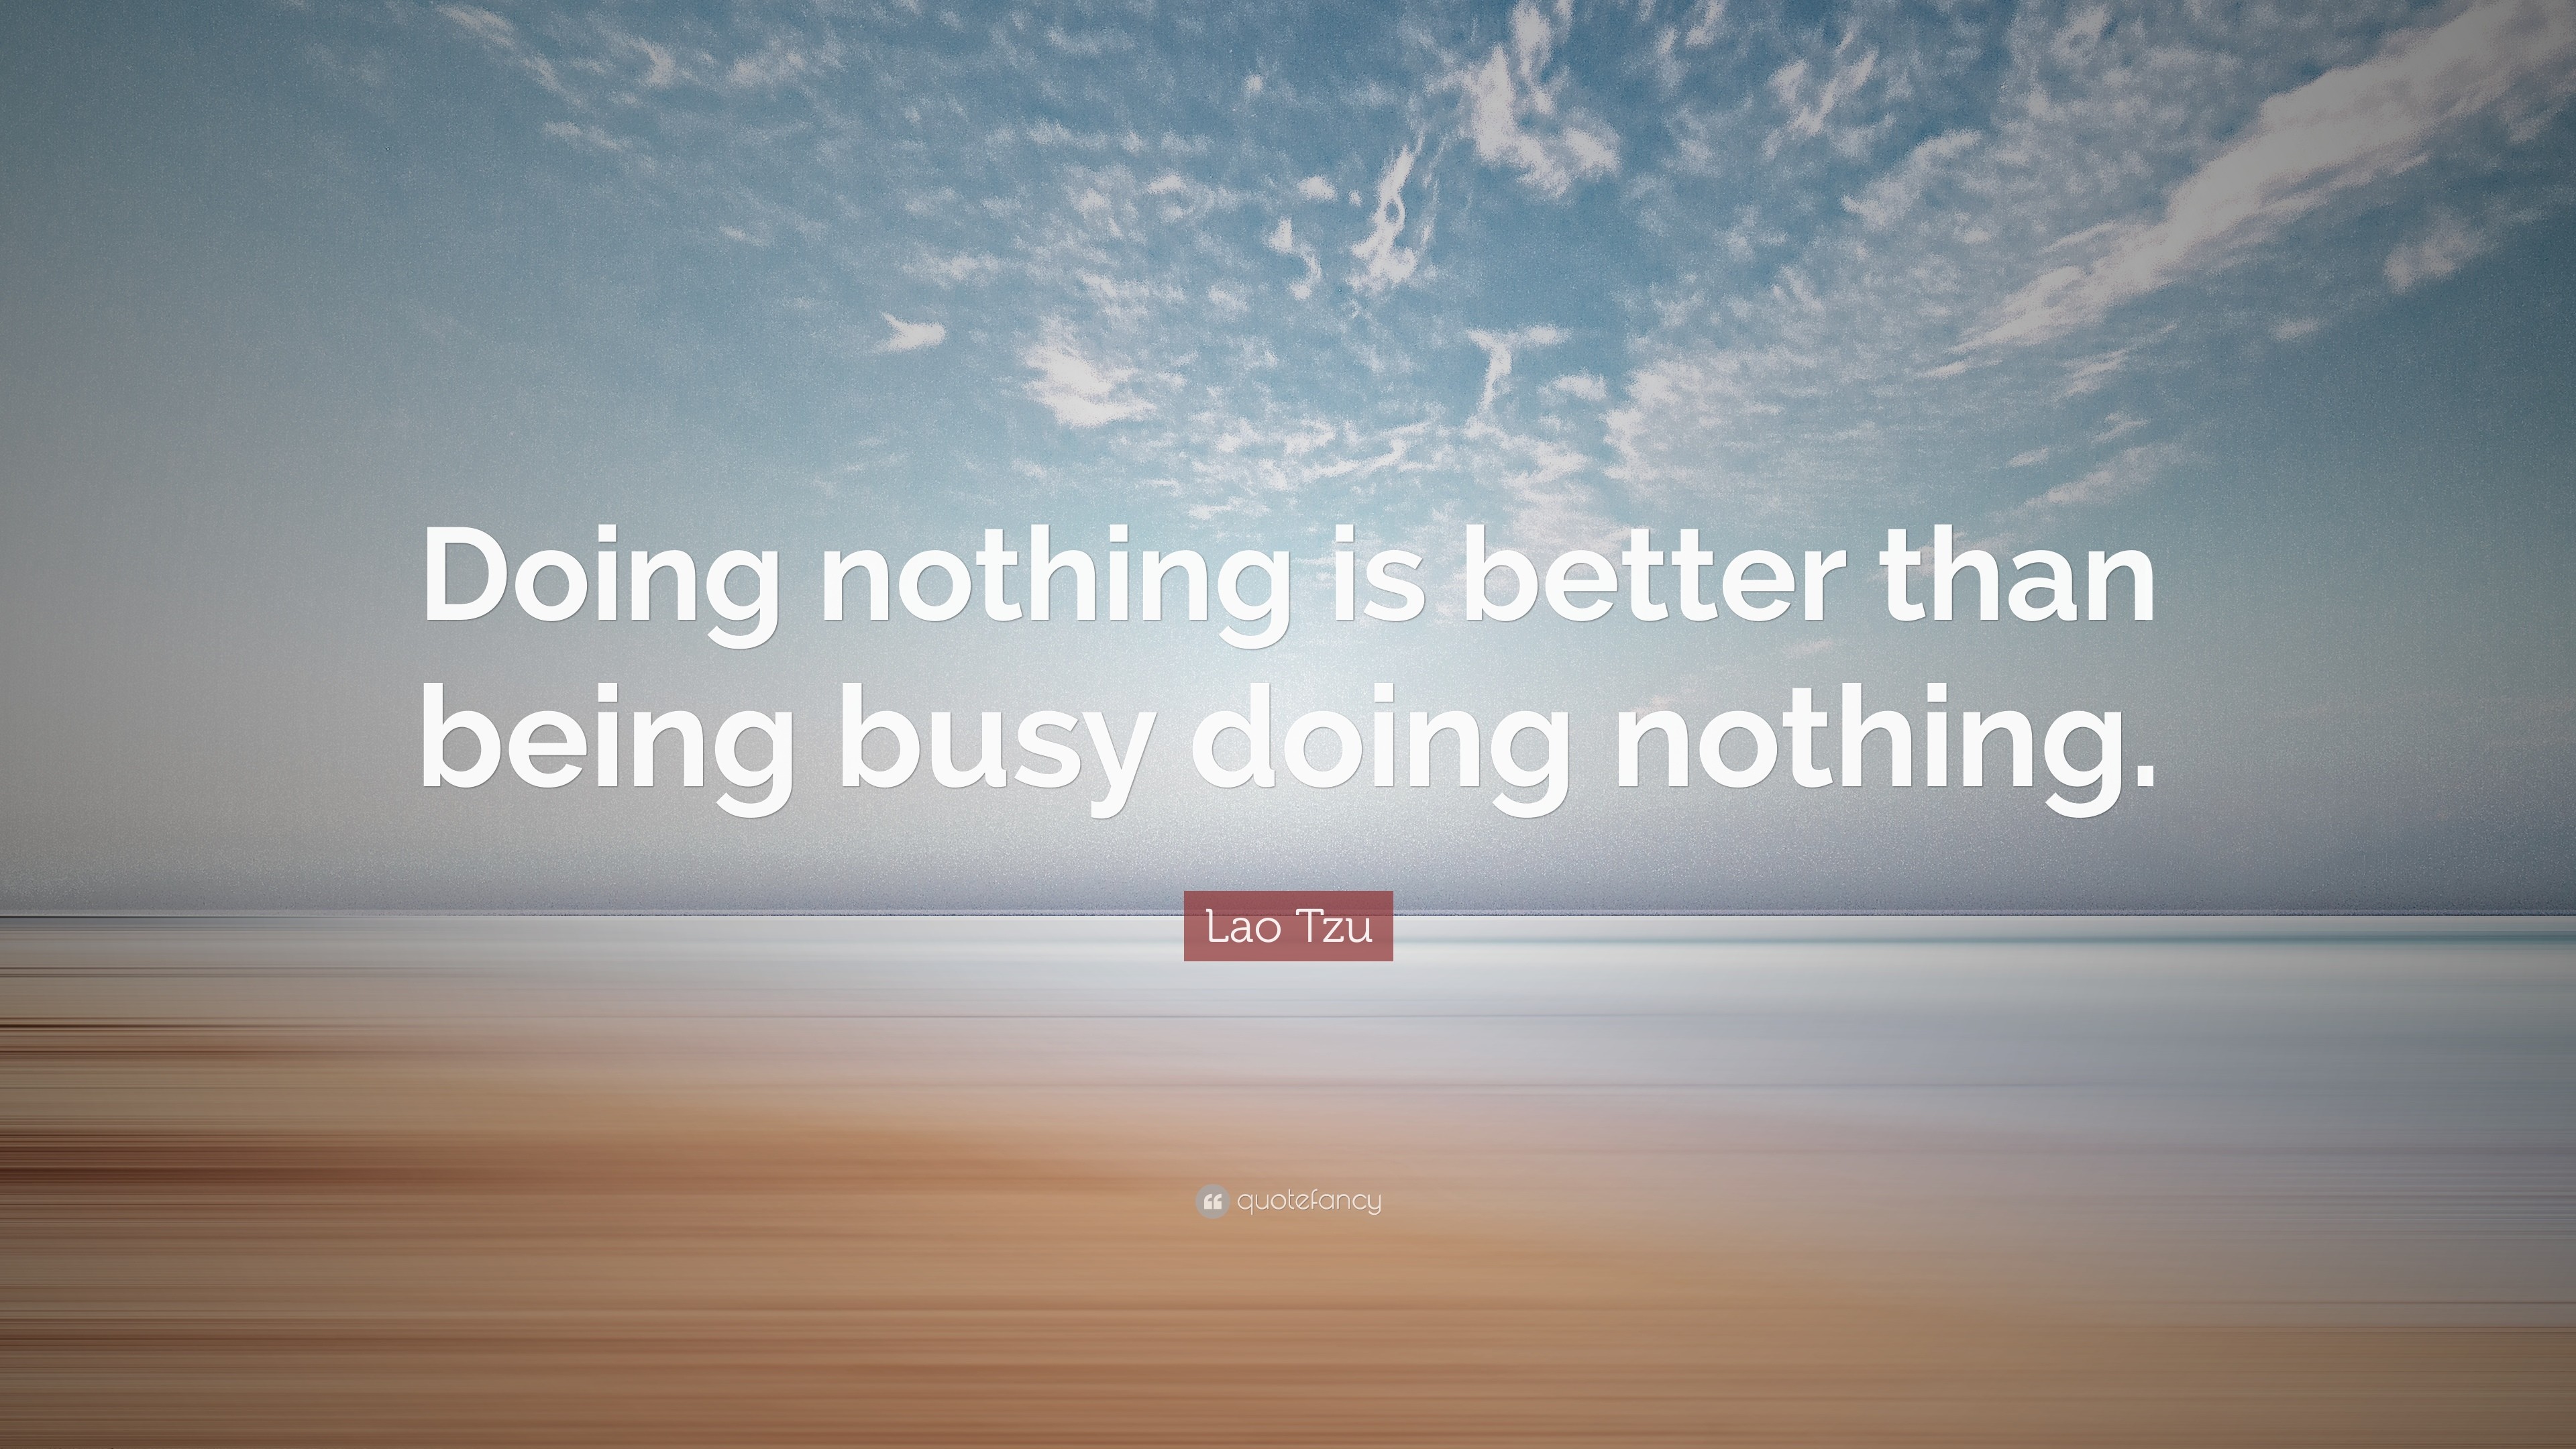 3840x2160 Lao Tzu Quote: “Doing nothing is better than being busy doing nothing.”